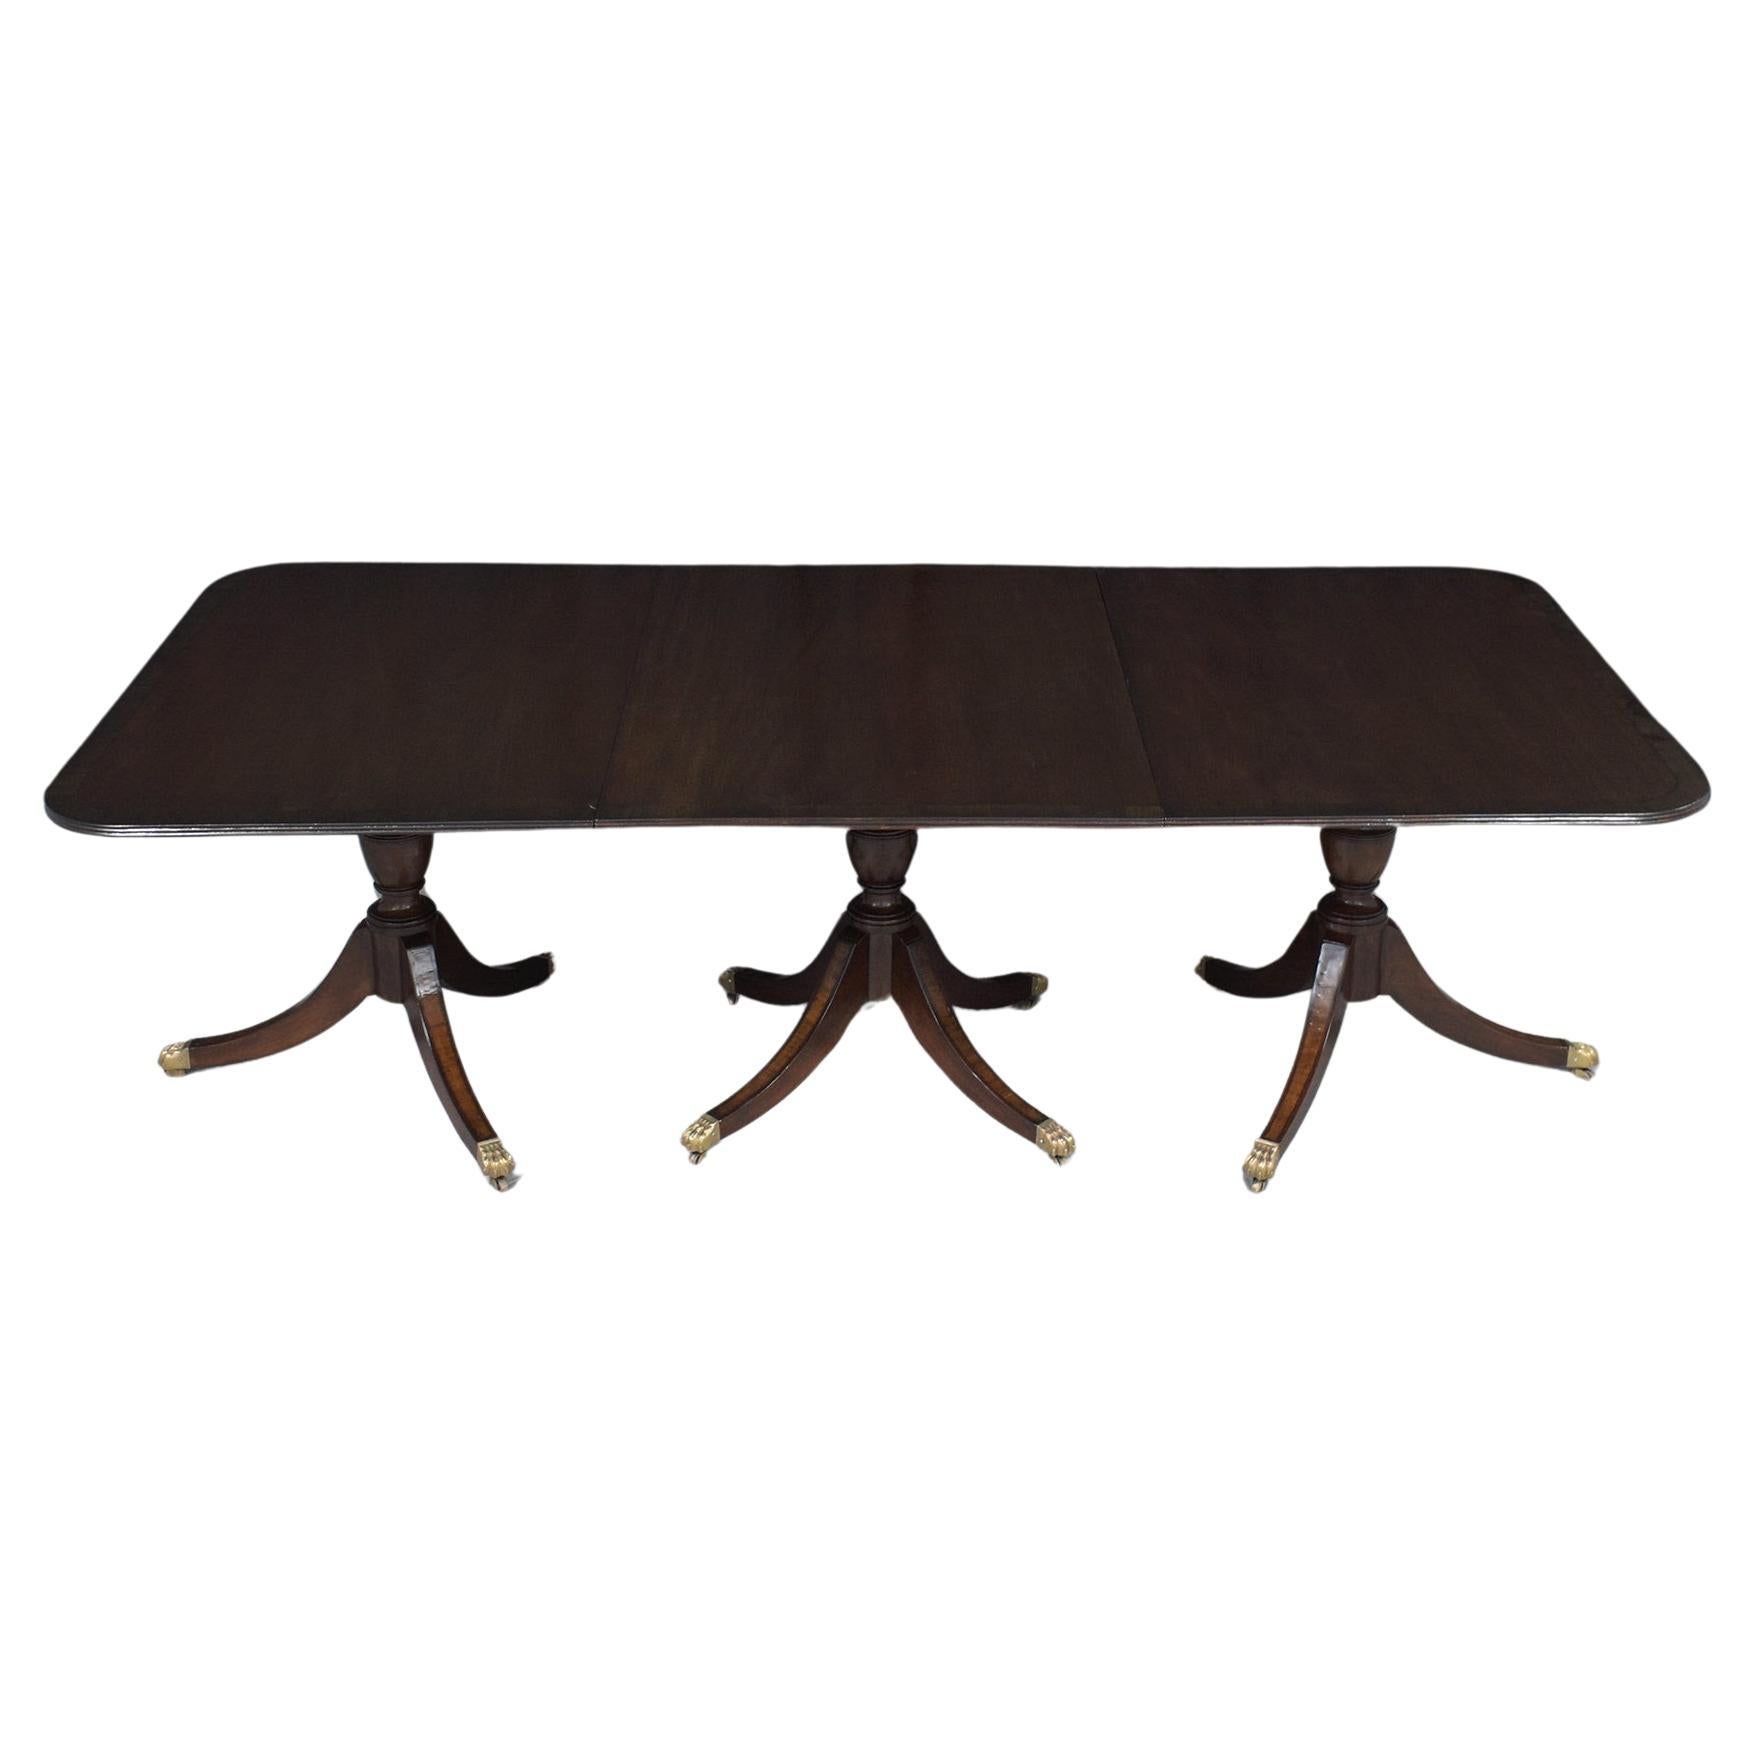 Restored 1890s George III Mahogany Dining Table with Extendable Leaves For Sale